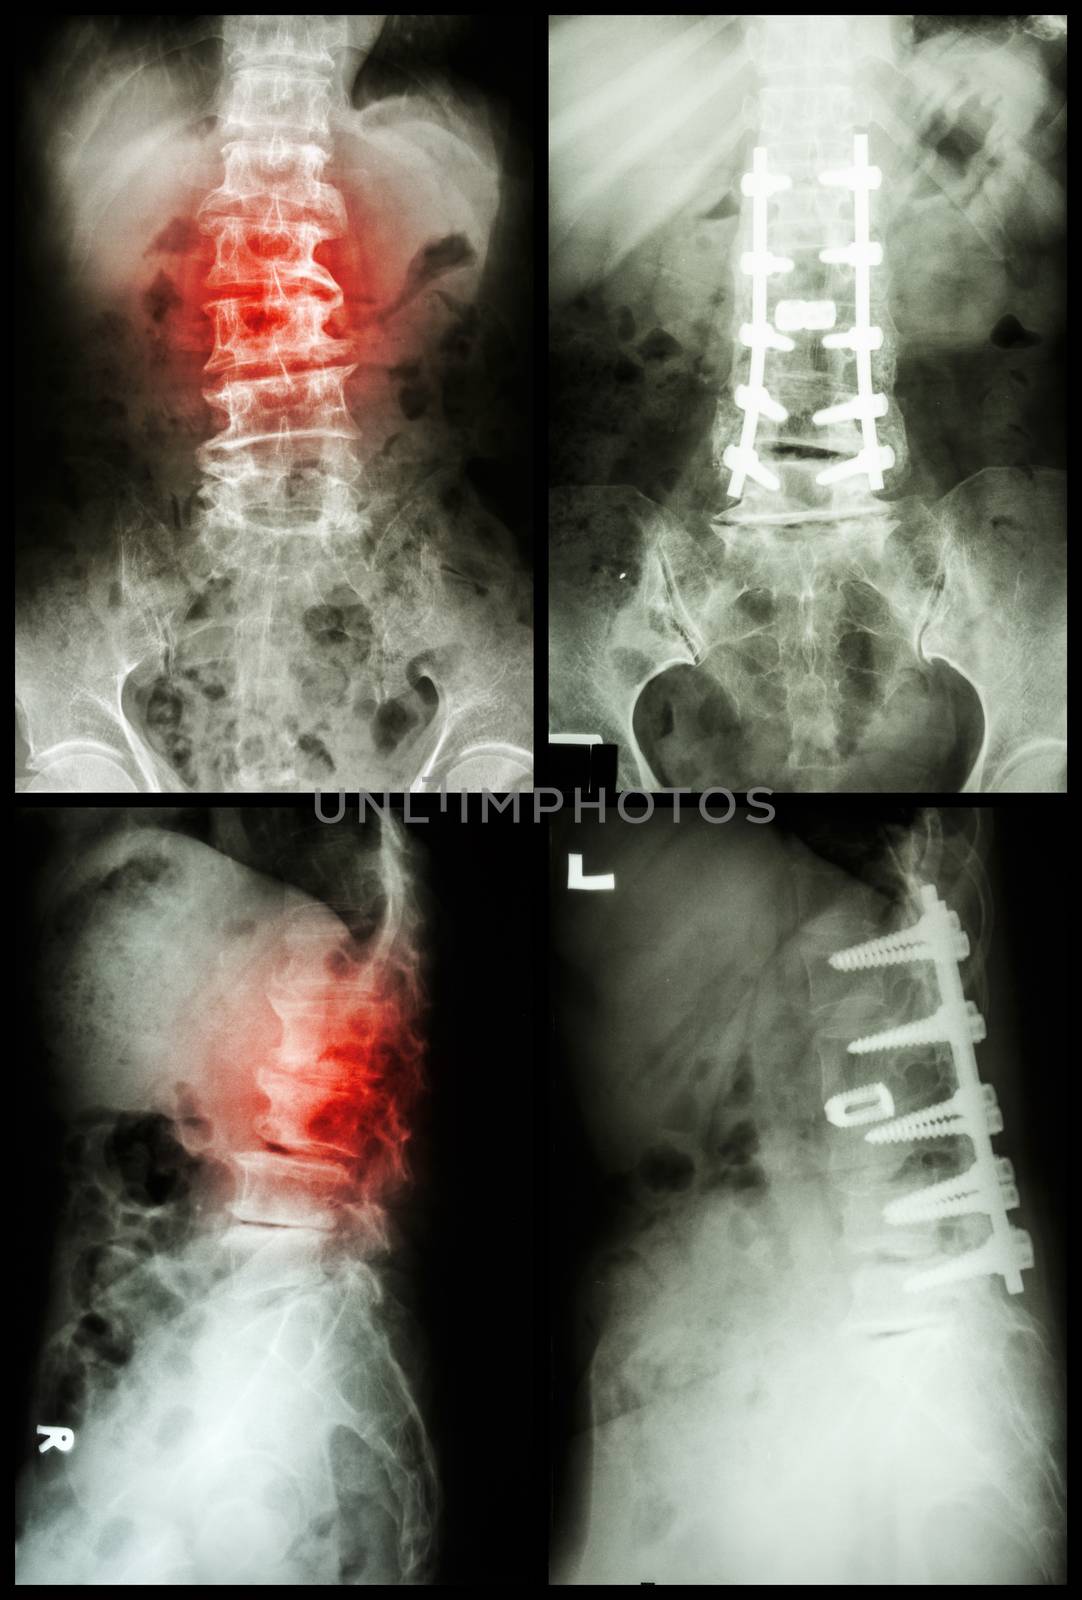 "Spondylosis and Spondylolisthesis" It was operated and internal fixed at spine (Left image : before operated) (Right image : after operated)